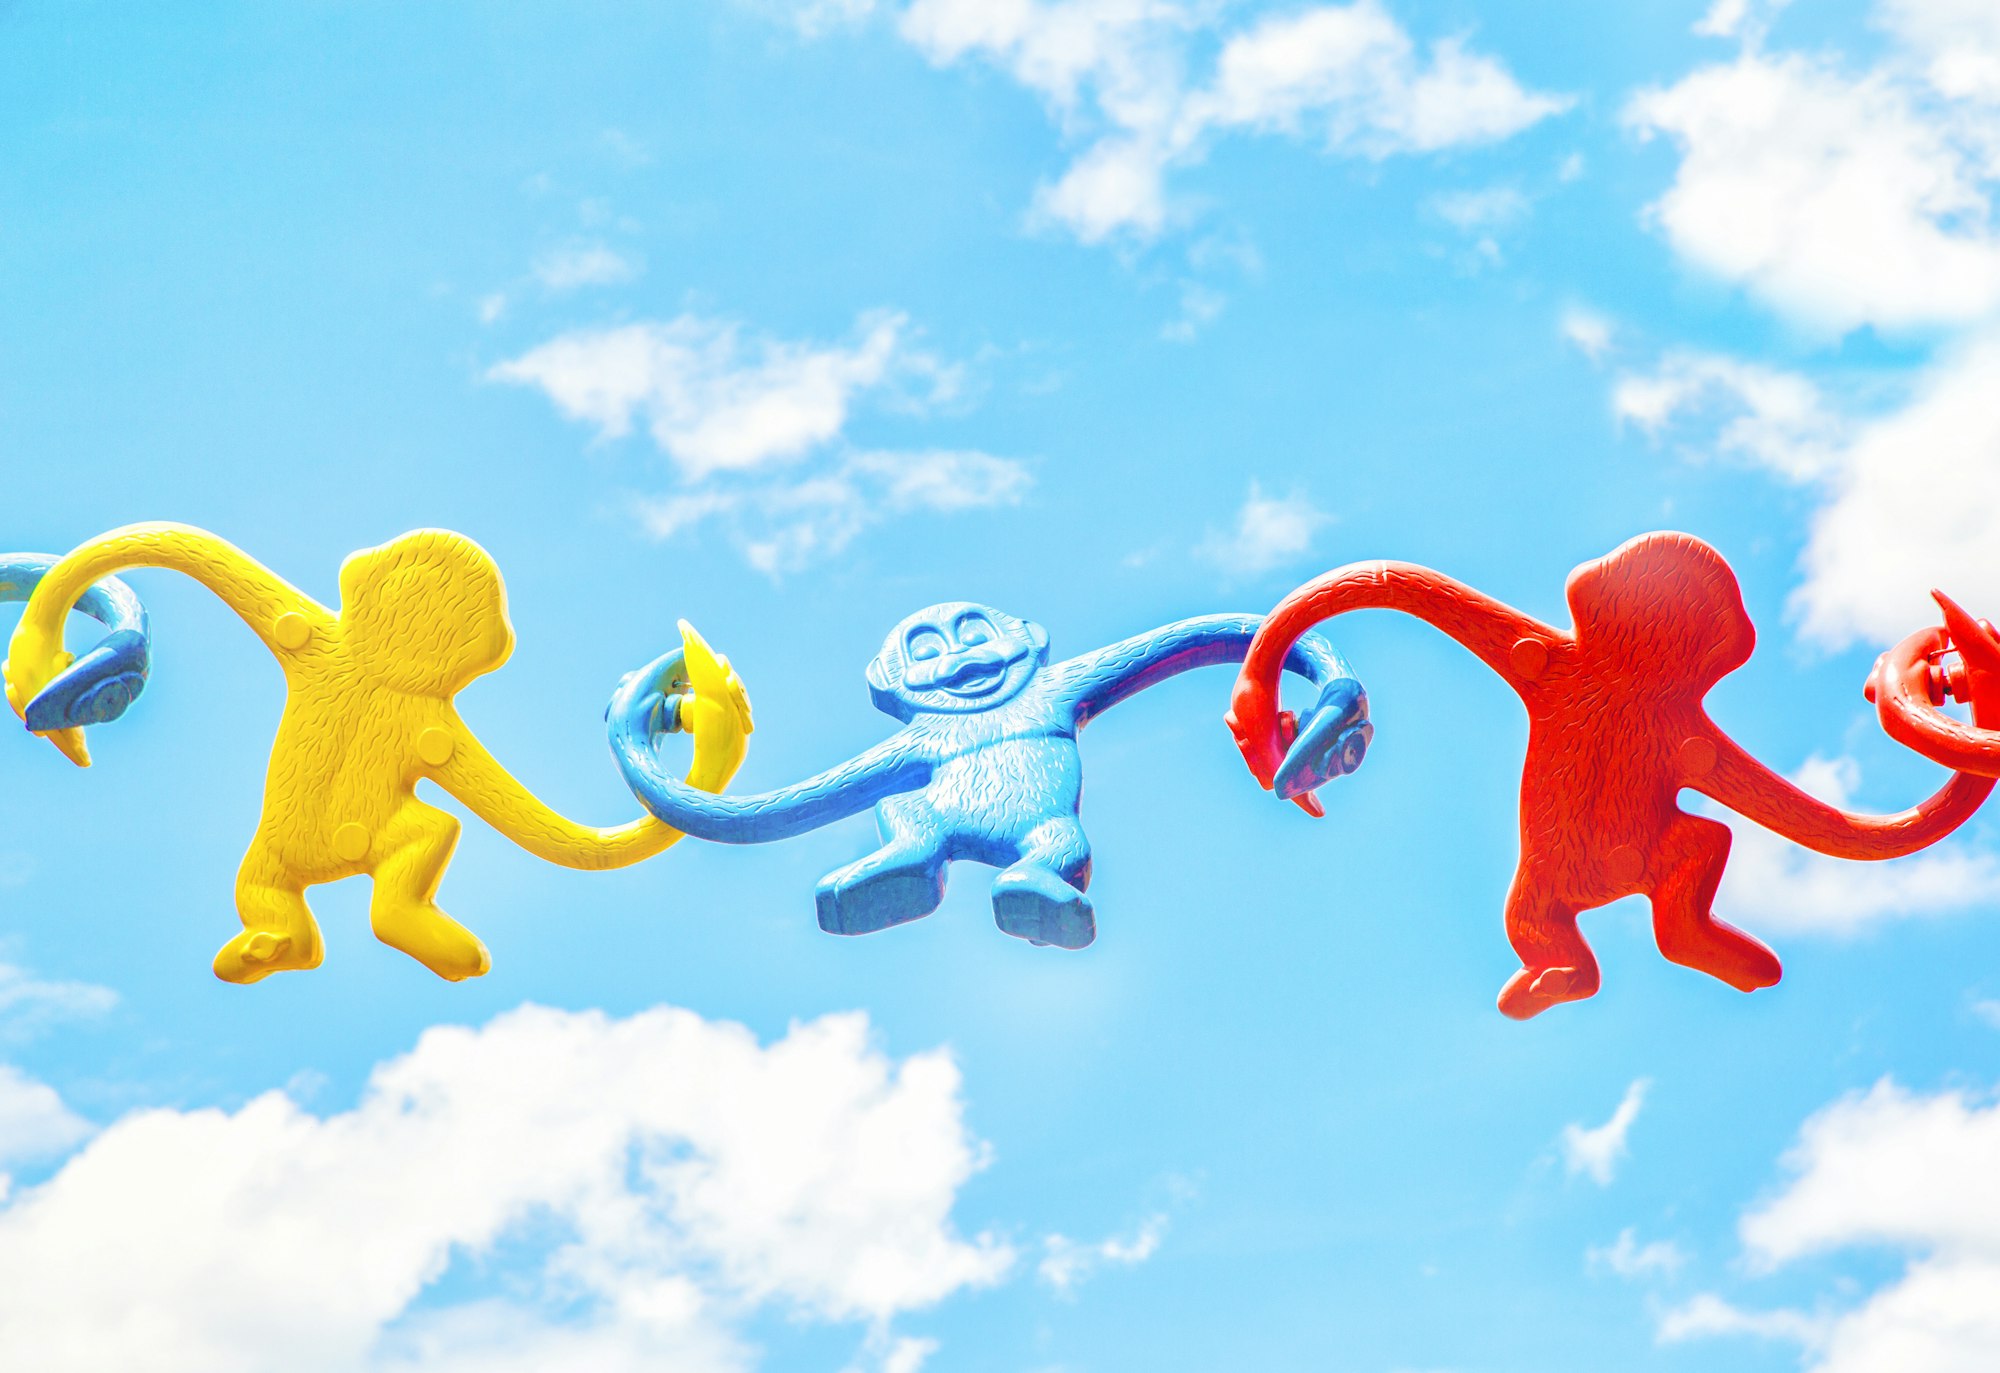 IMAGE: Three plastic figurines of monkeys holding hands, with a bright blue sky in the background. 